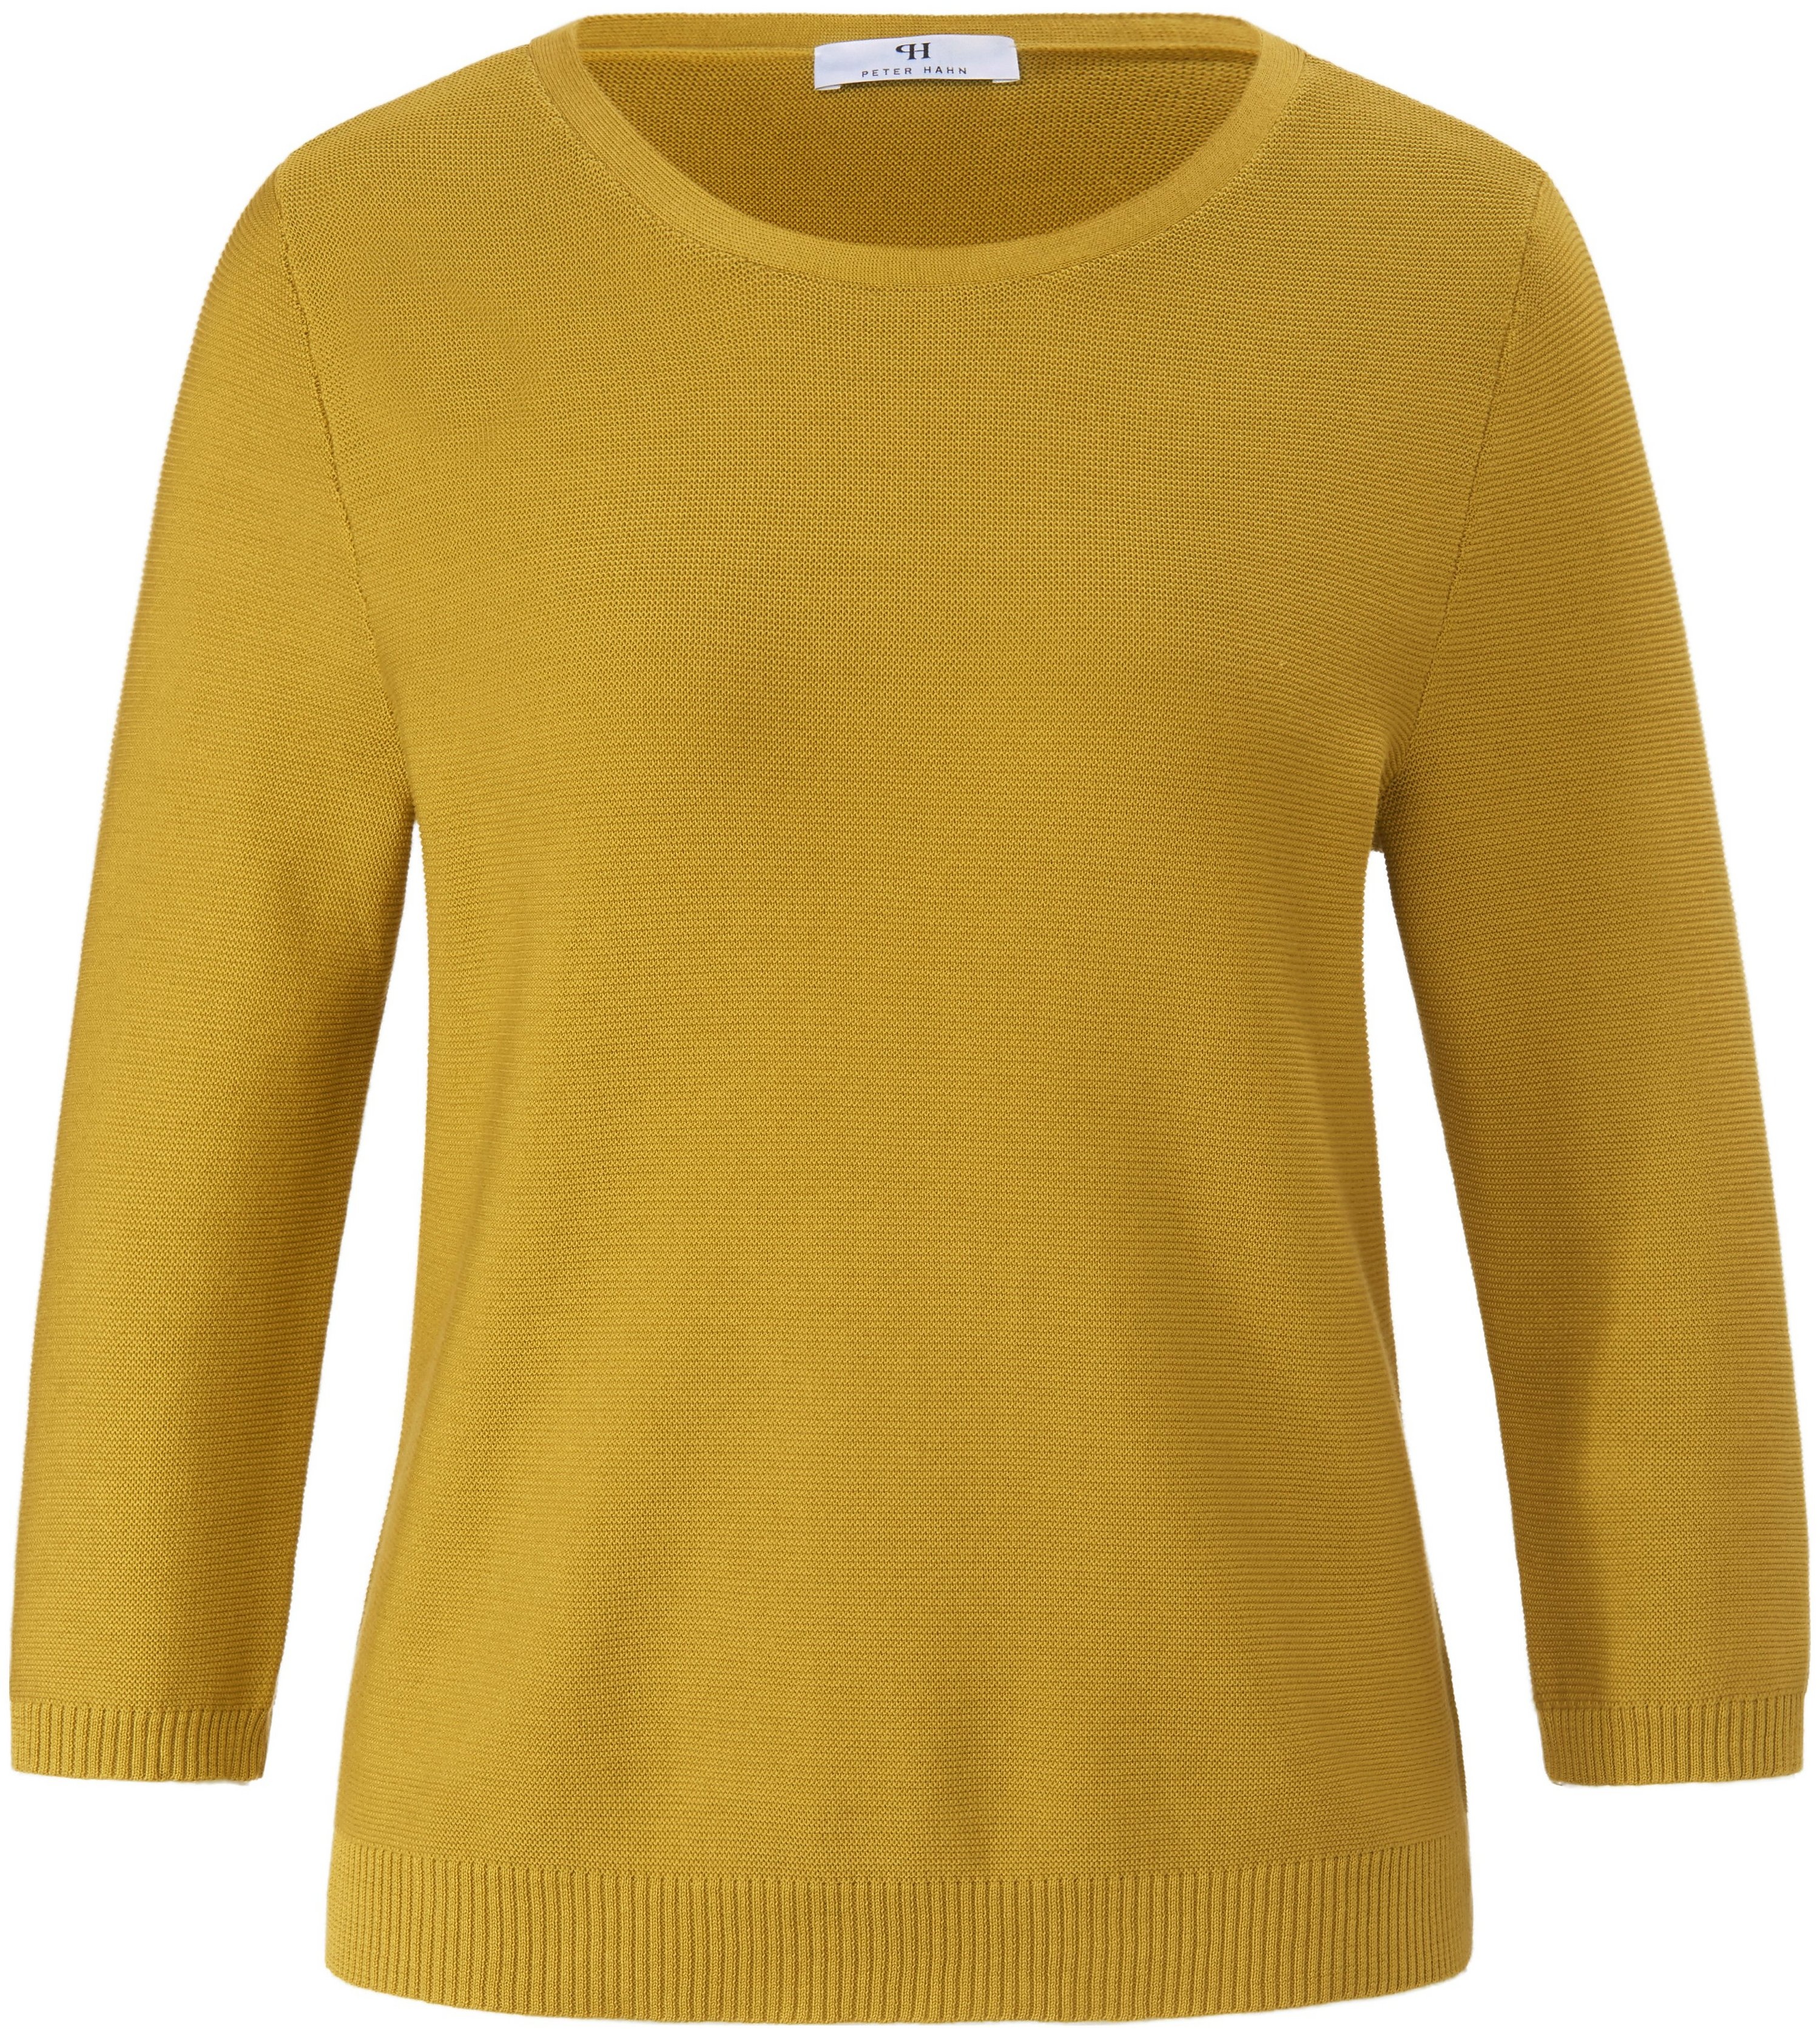 Le pull manches 3/4 100% coton  Peter Hahn vert